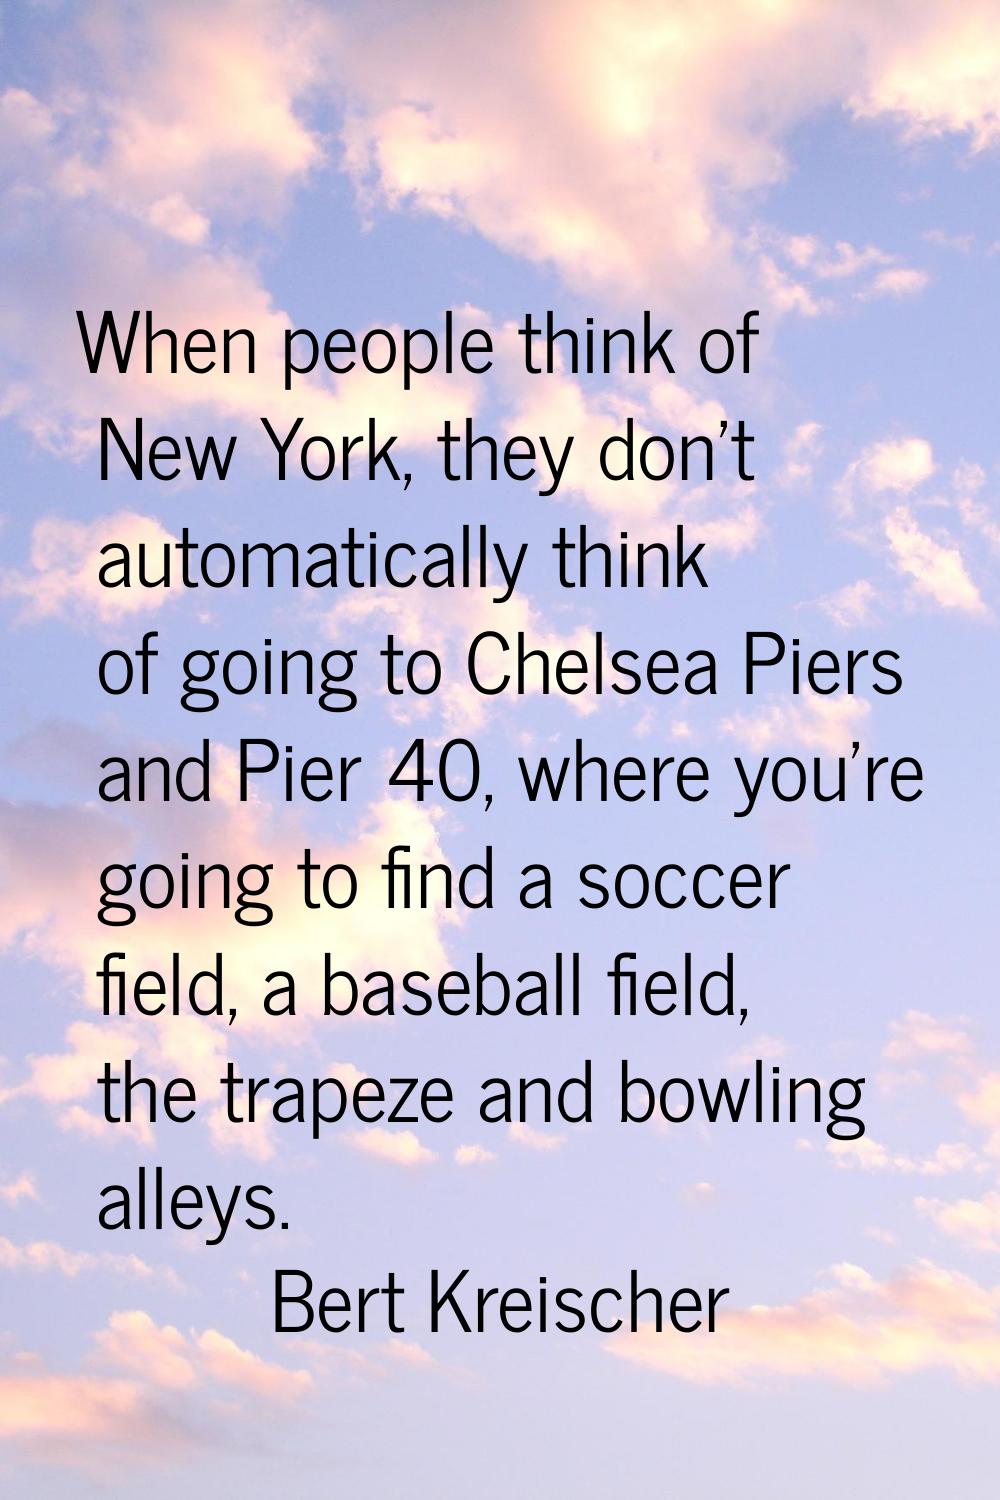 When people think of New York, they don't automatically think of going to Chelsea Piers and Pier 40